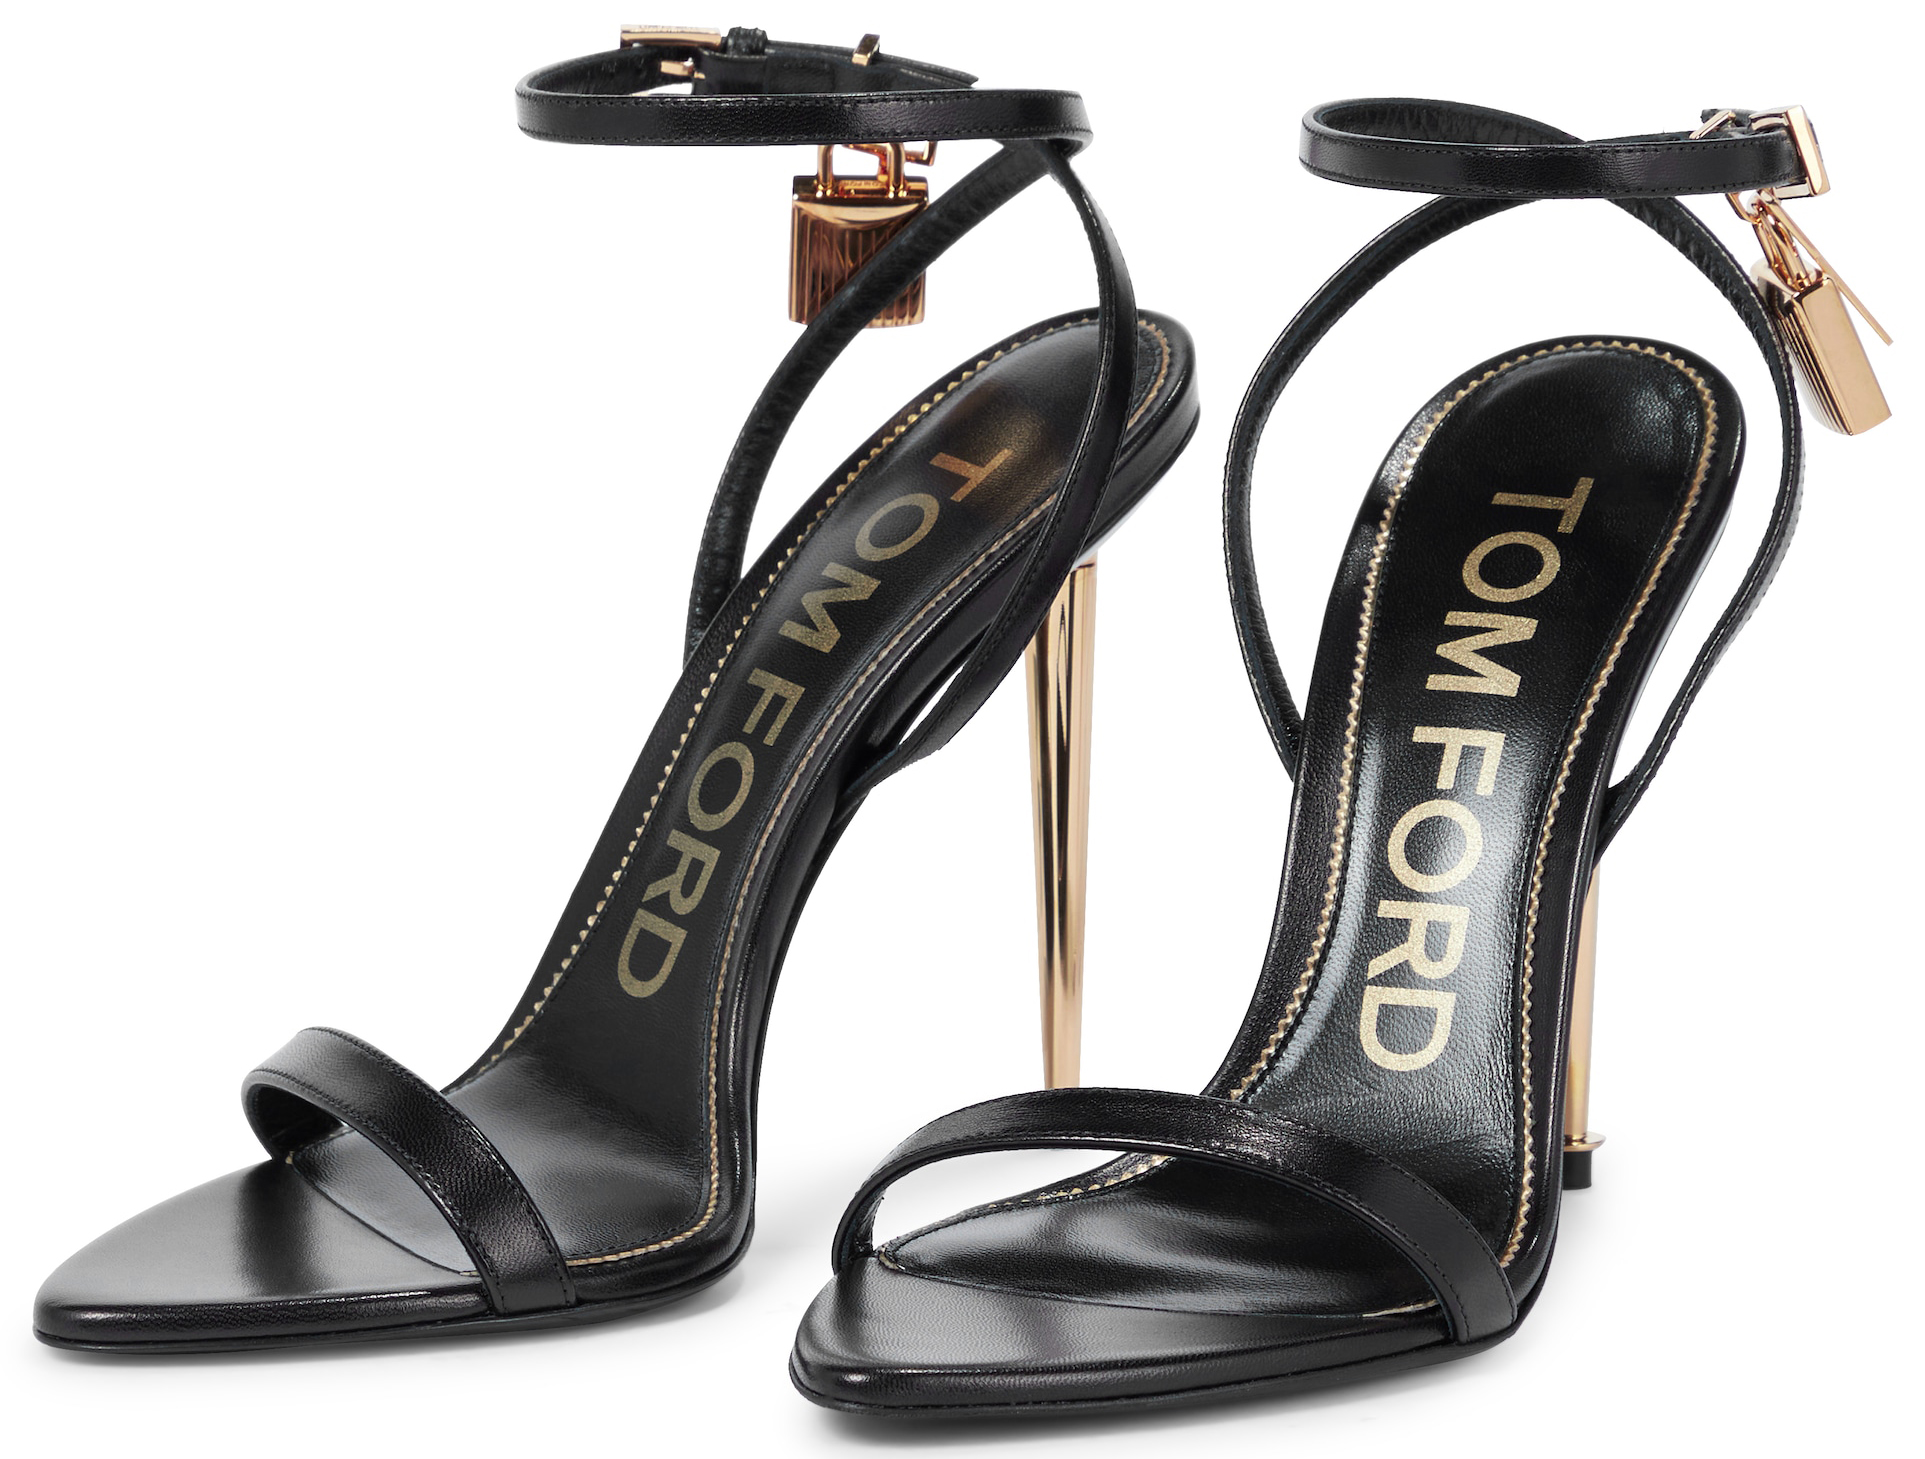 These Tom Ford sandals are defined by the padlock charms hanging from the ankle straps